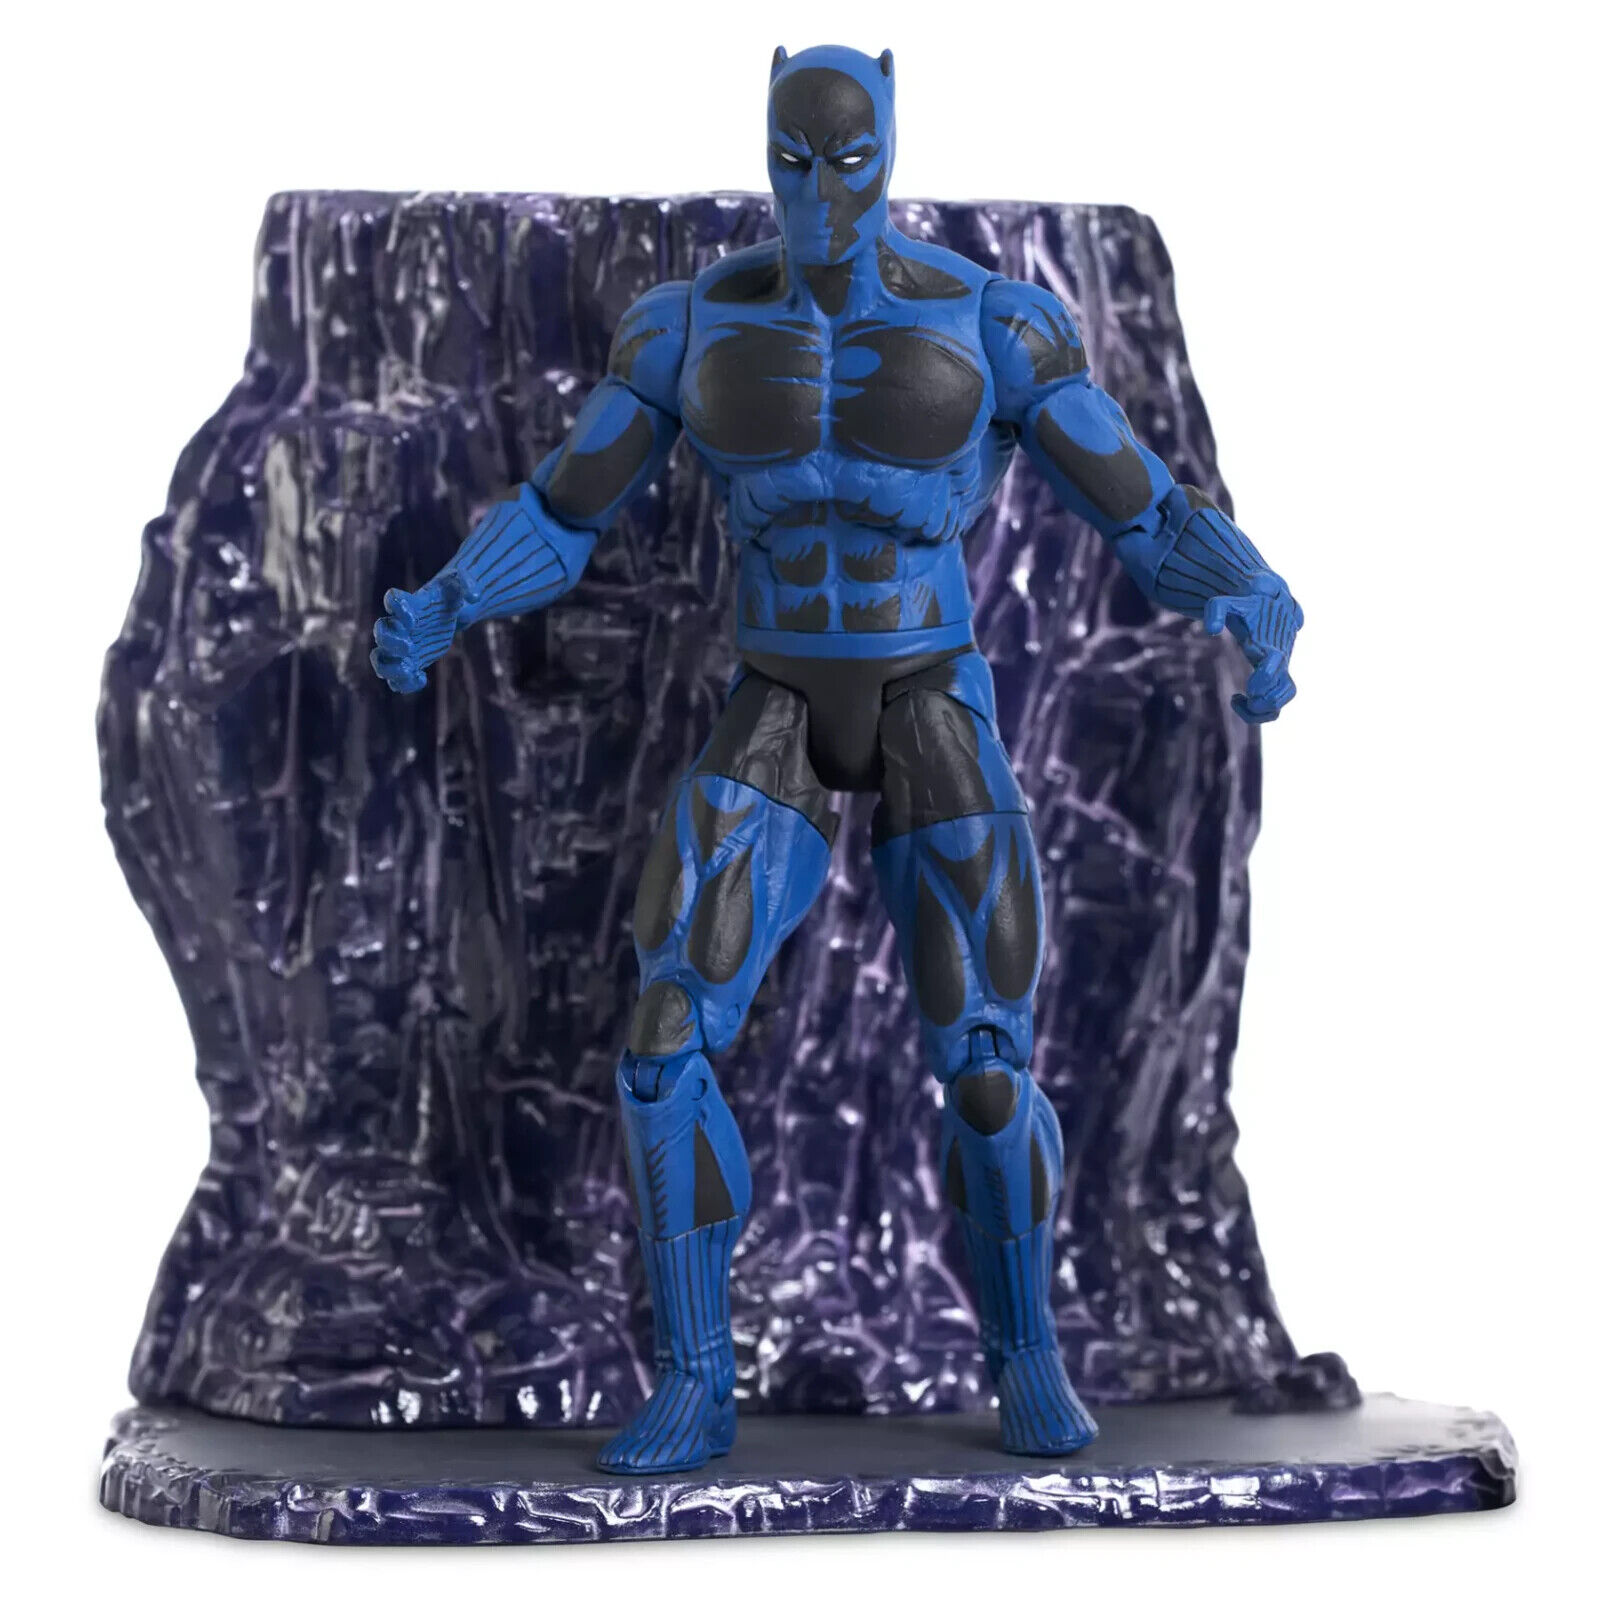 Disney/MARVEL Black Panther SPECIAL COLLECTOR'S EDITION 7